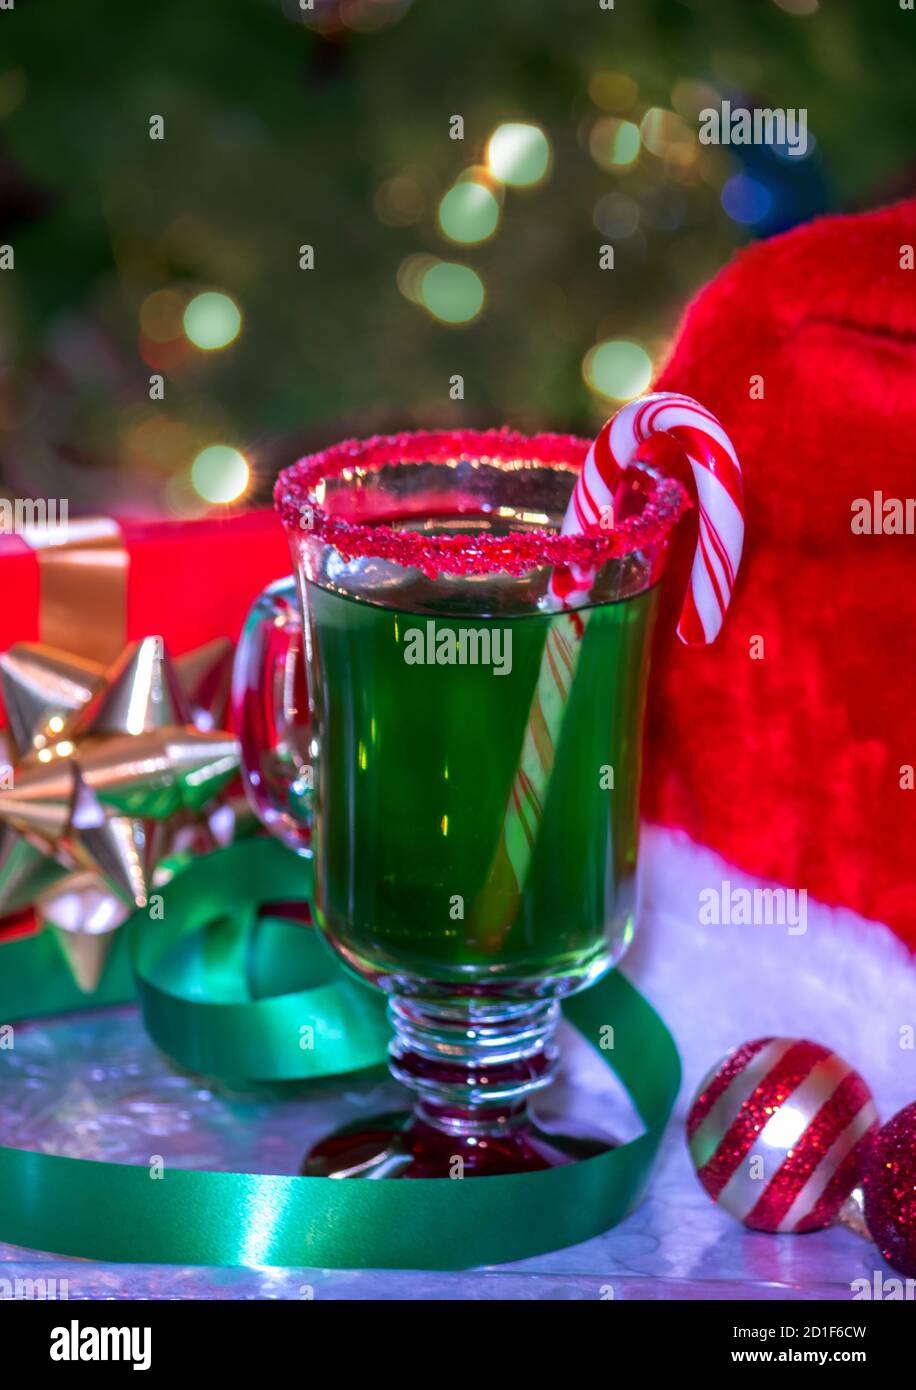 This festive holiday drink is set next to a santa hat on Christmas eve. Green punch with a red sugar rim and a candy cane, makes a perfect Christmas n Stock Photo